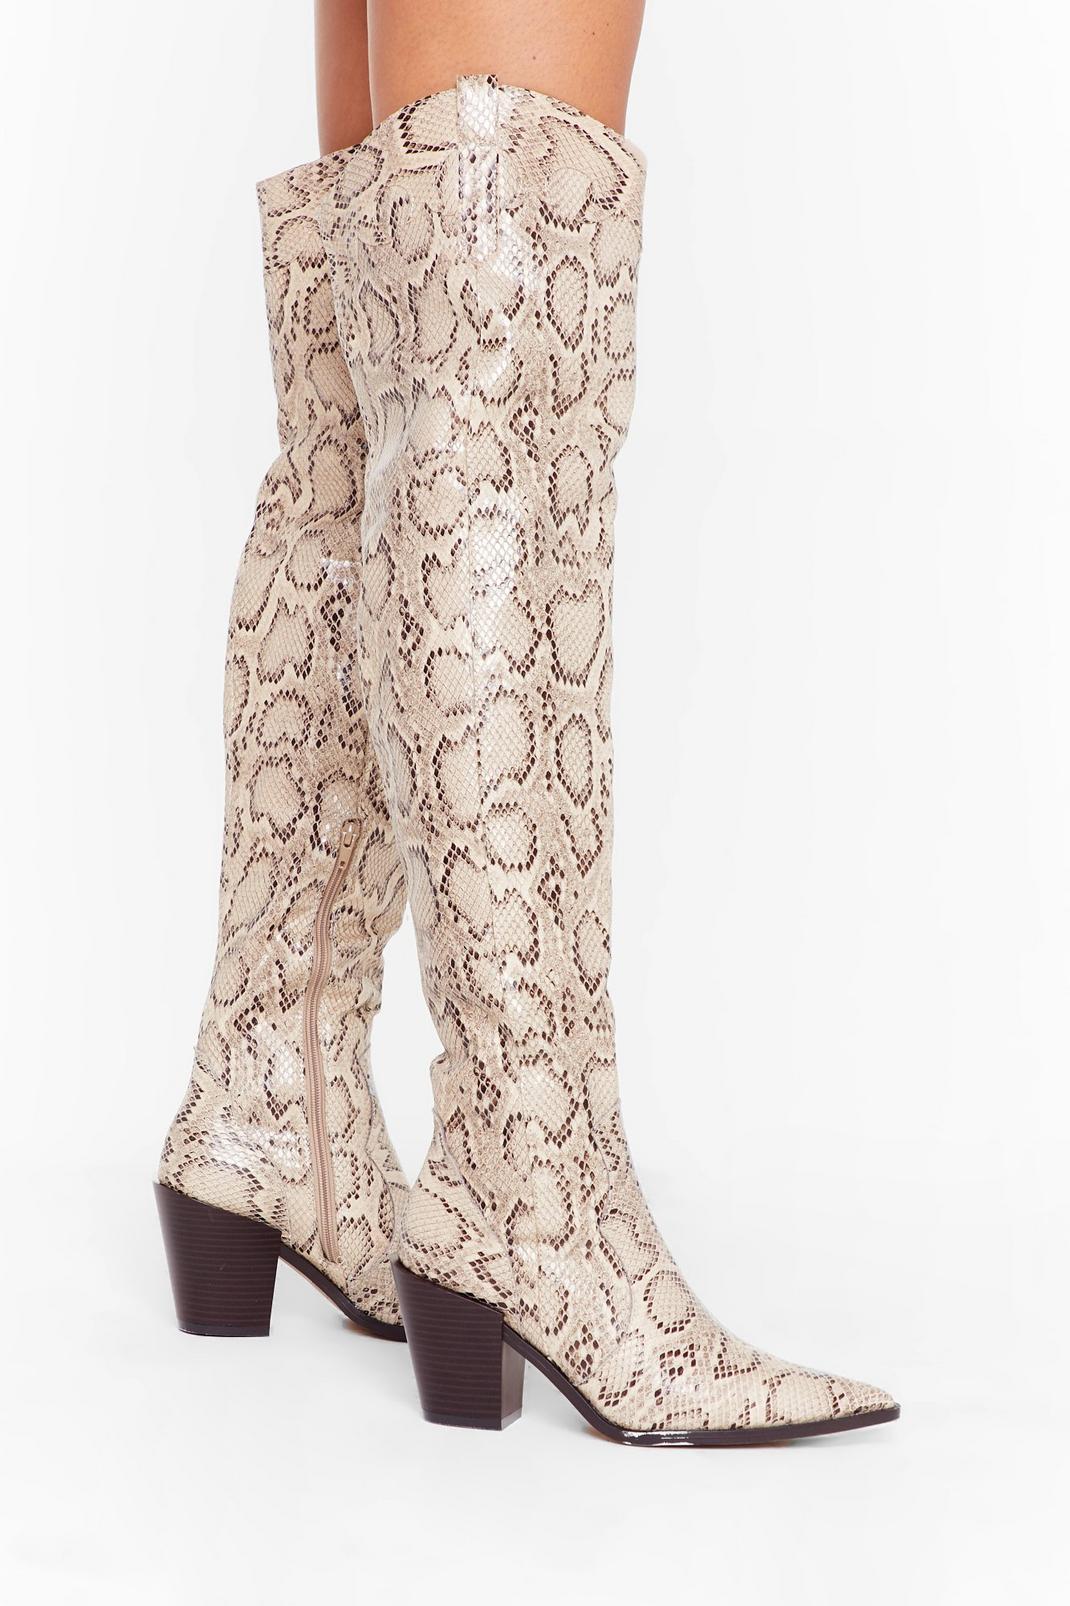 Snake It or Leave It Faux Leather Over-the-Knee Boots image number 1